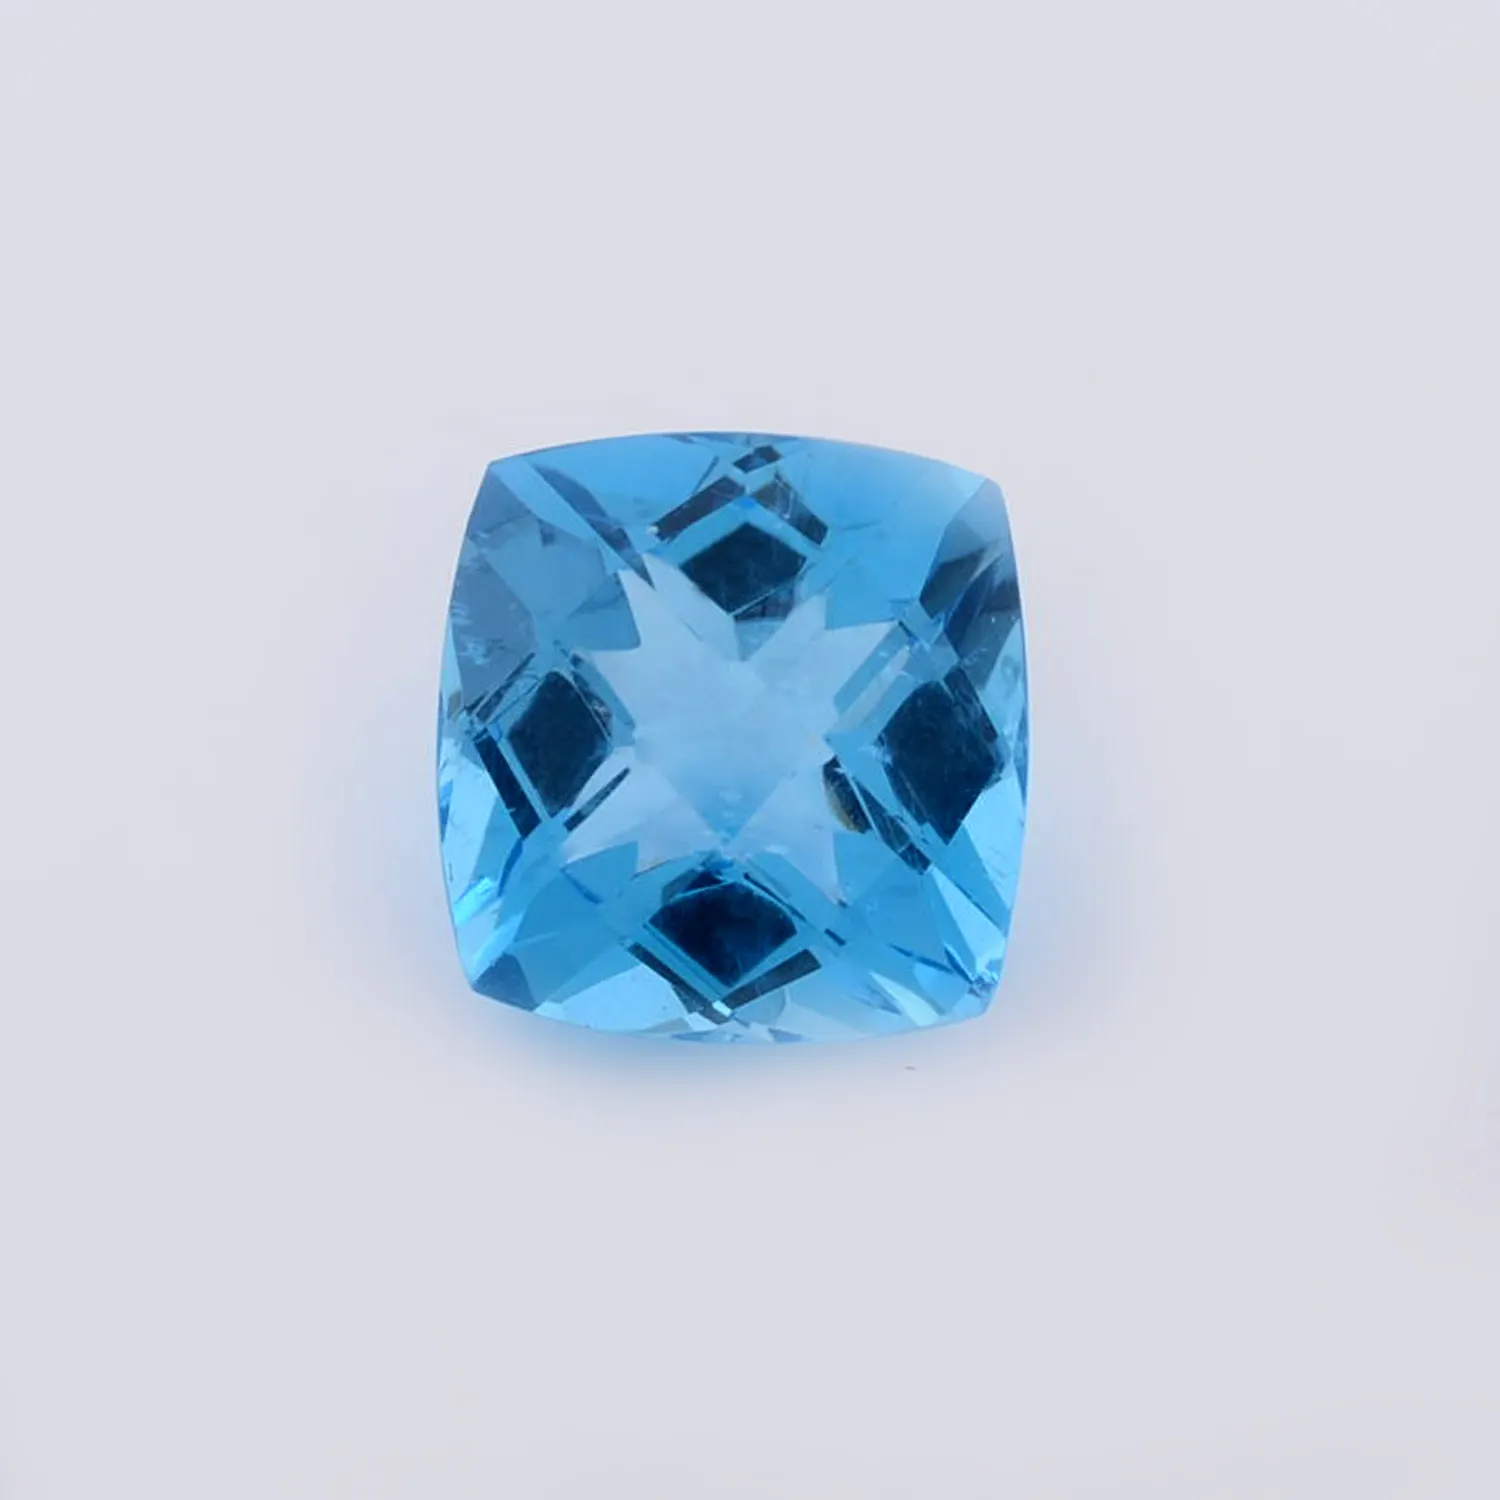 Cushion Cut Natural Loose Semiprecious Swiss Blue Topaz Faceted Gemstones Top Quality Gemstone For Making Fine Jewelry Earring